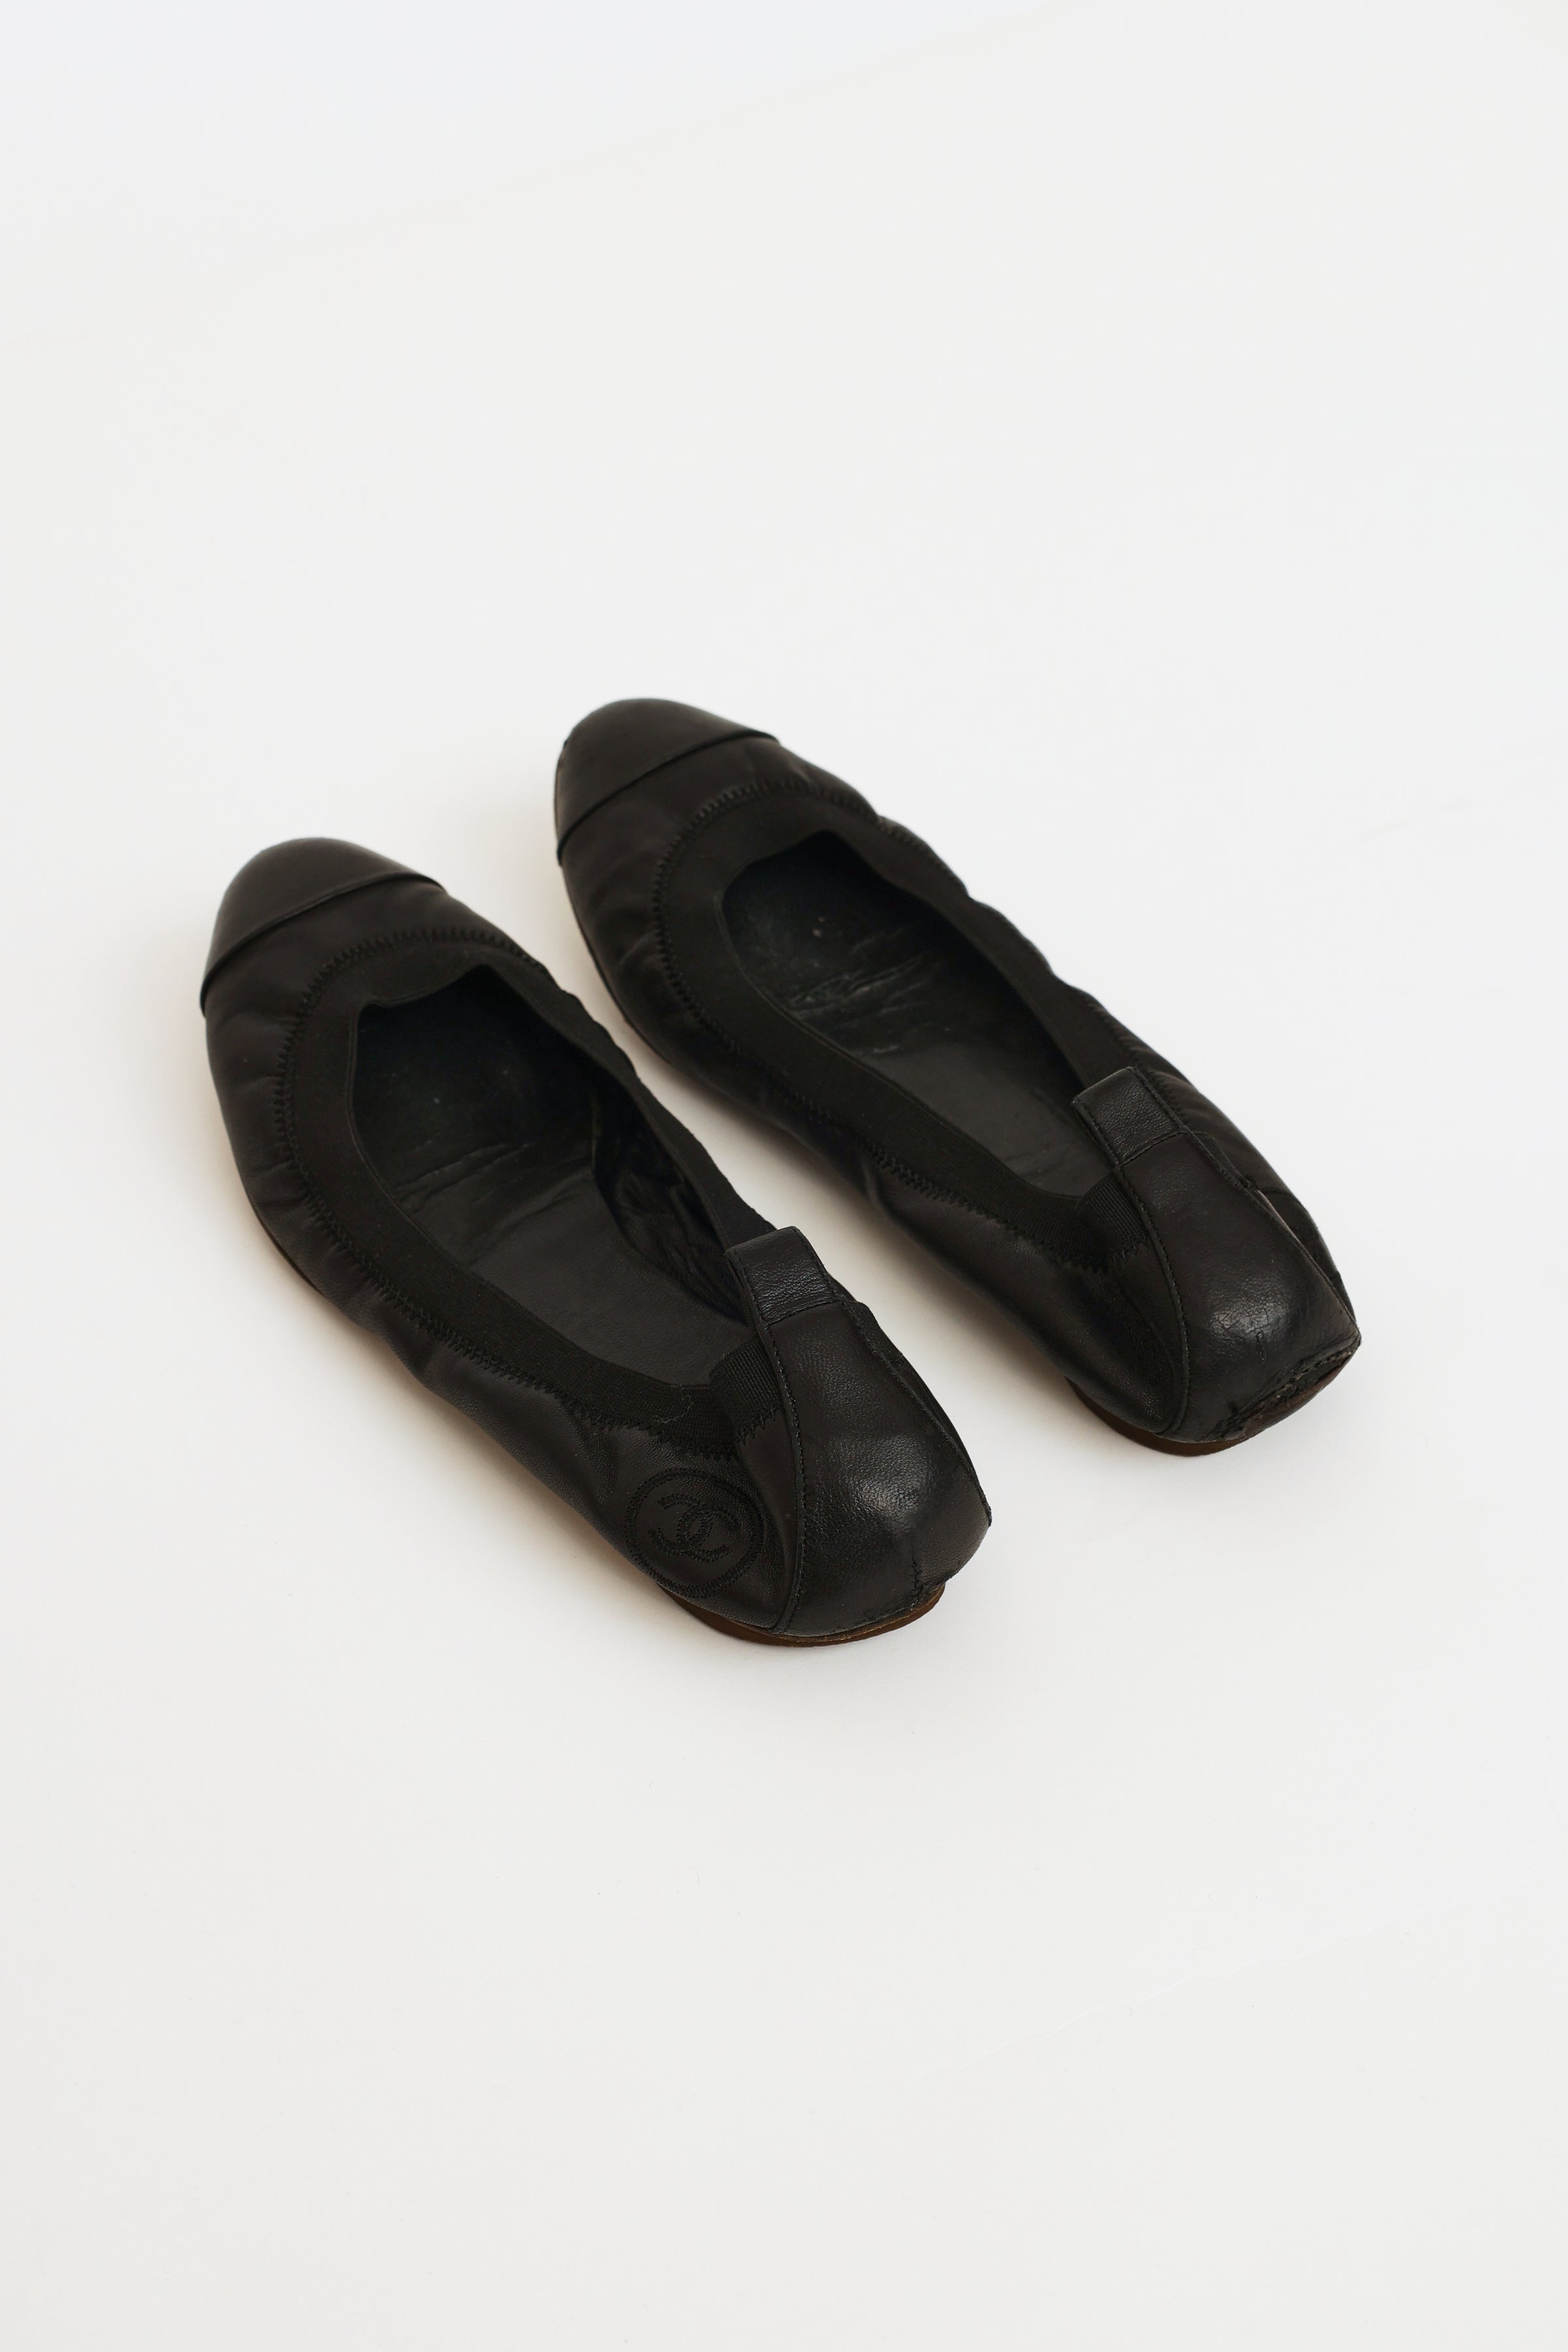 Chanel Women's Ballet flats  Buy or Sell Designer shoes - Vestiaire  Collective